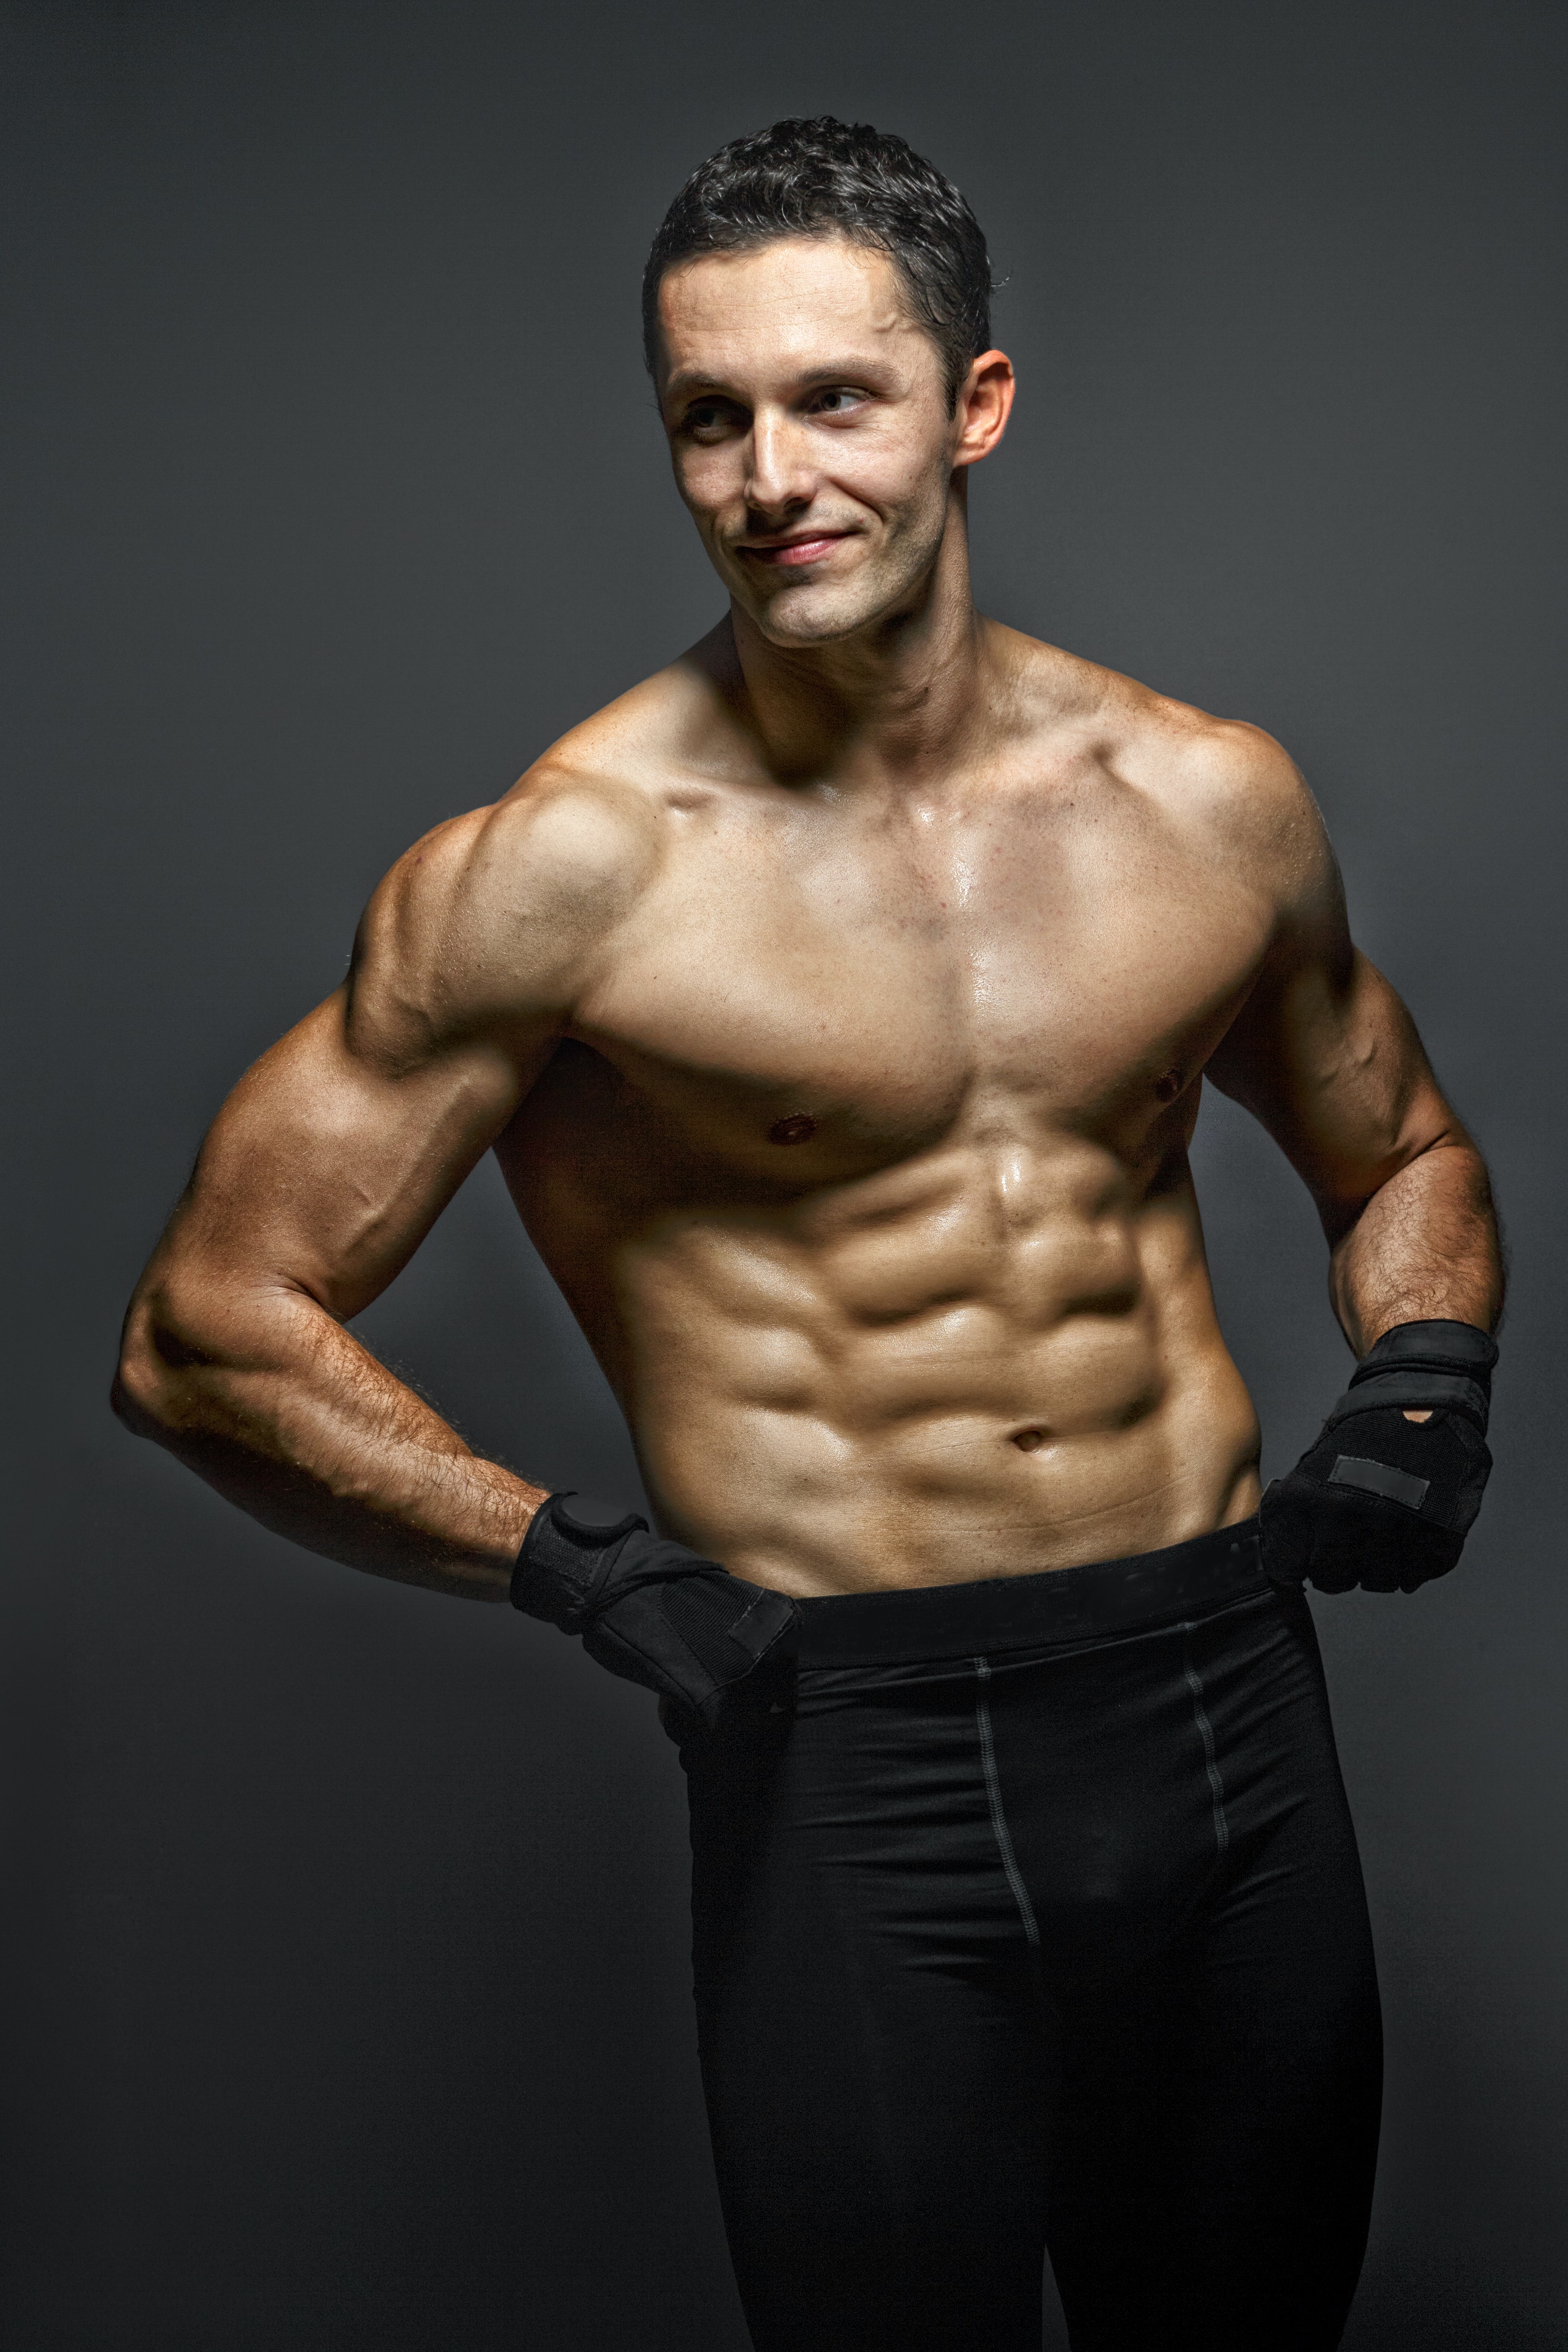 What is High Definition Liposuction and 6 pack abs creation?